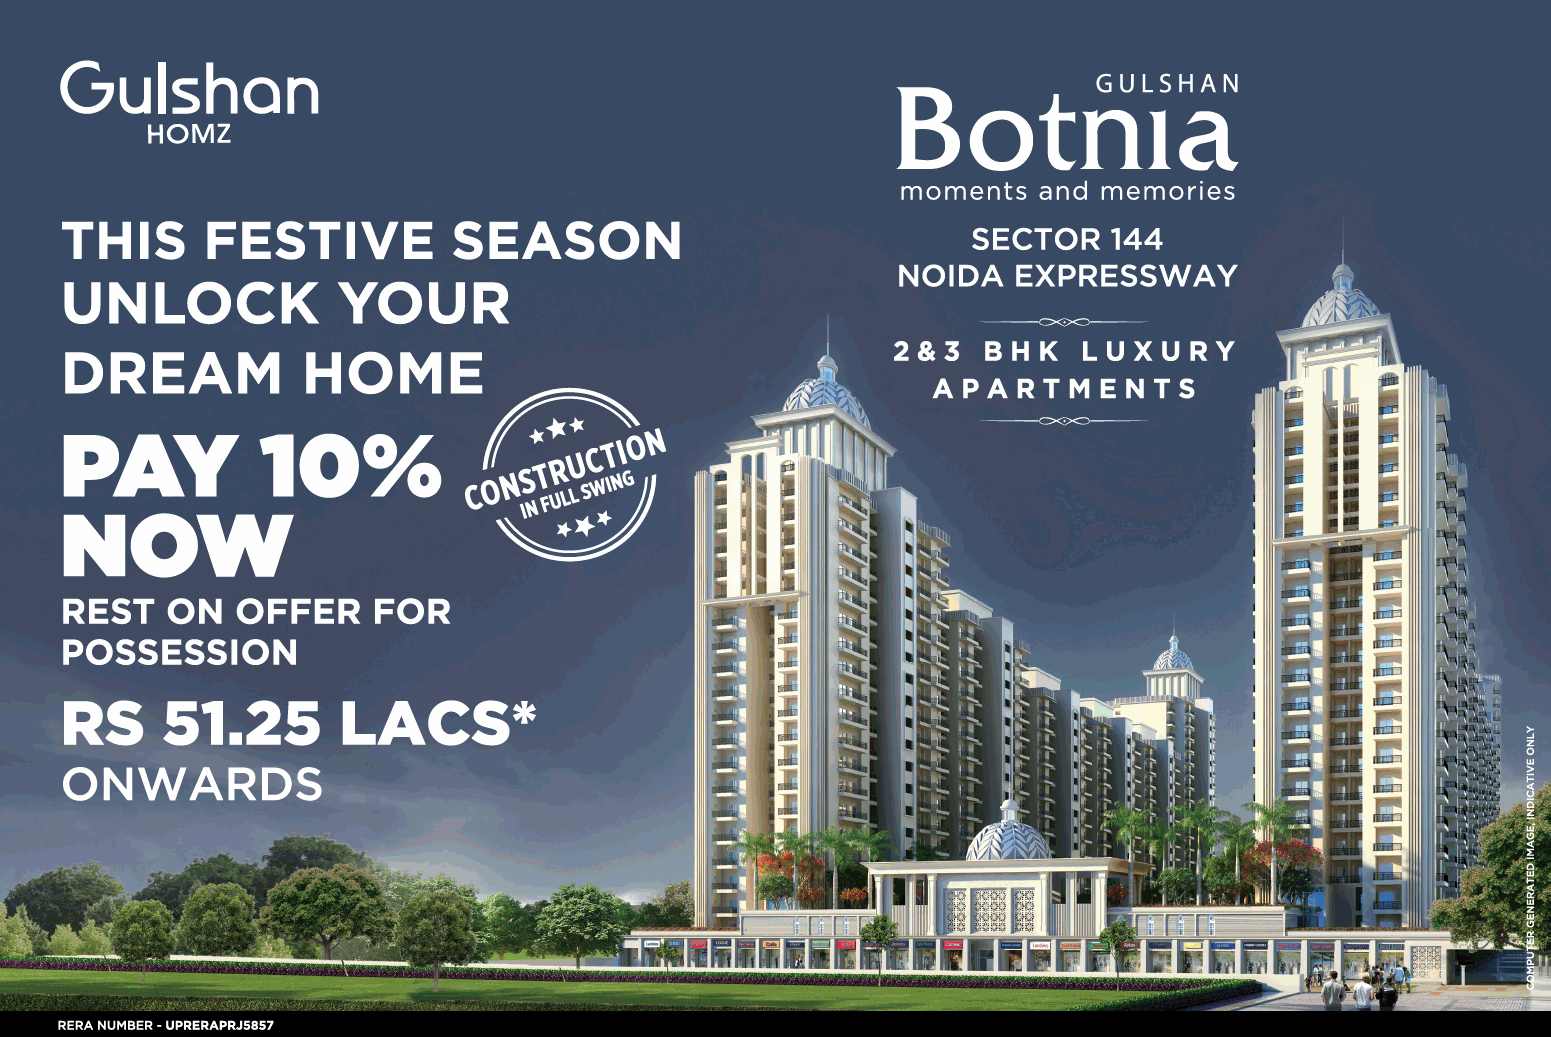 Pay 10% now & rest on possession at Gulshan Botnia in Sector 144, Noida Update